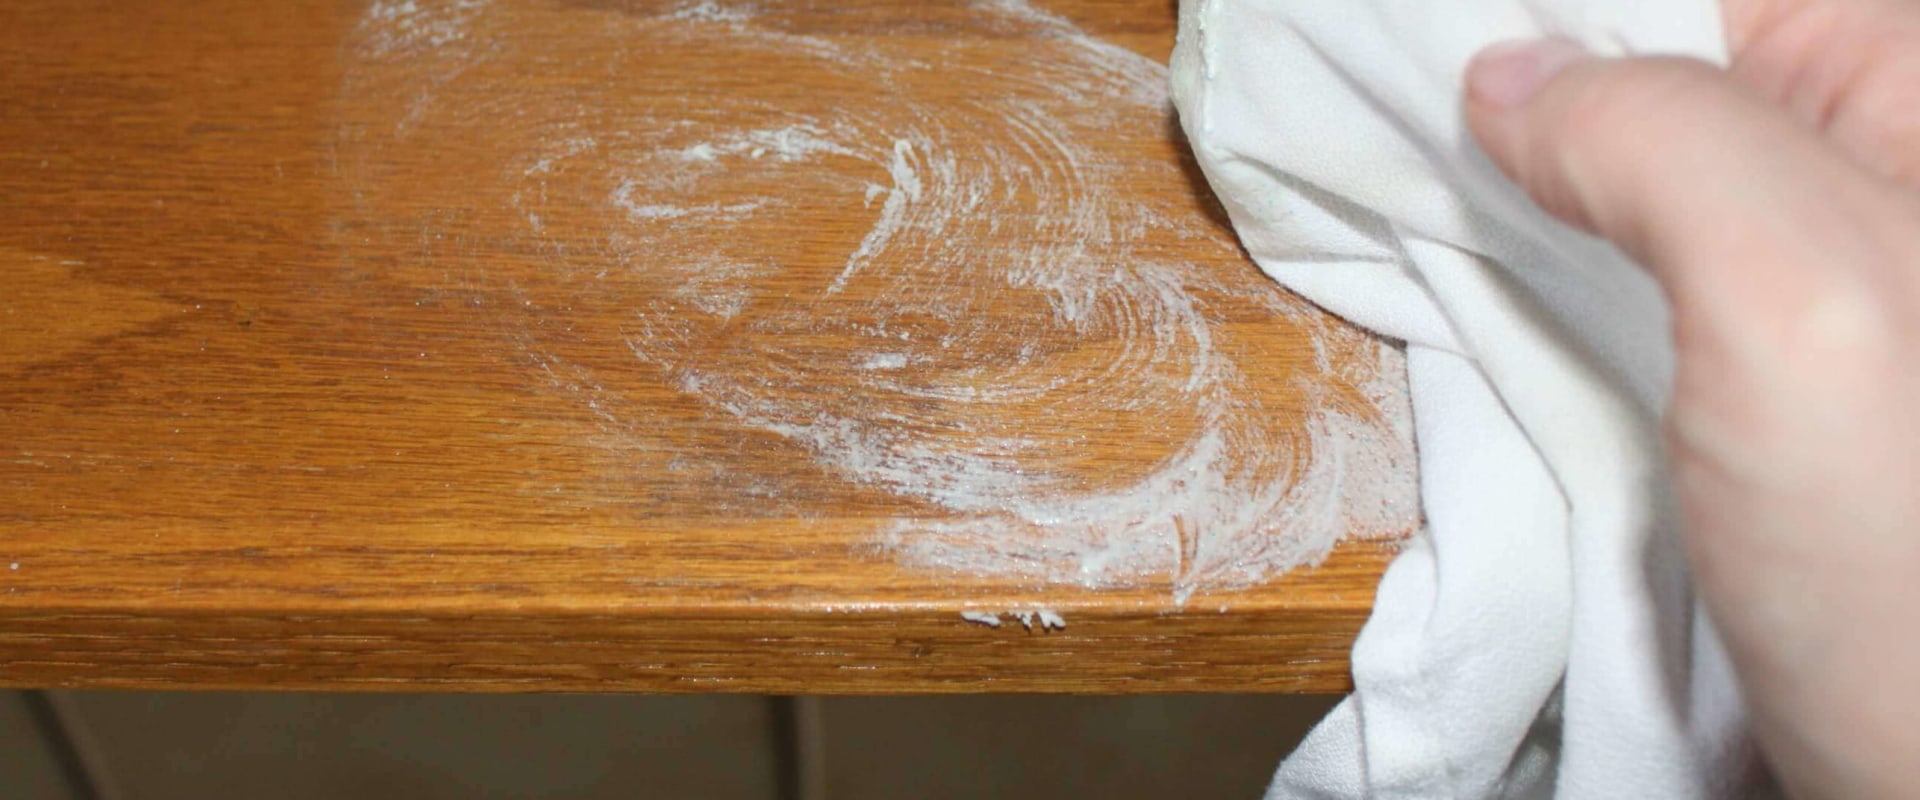 How to Reverse Water Damage on Wood: Tips and Tricks